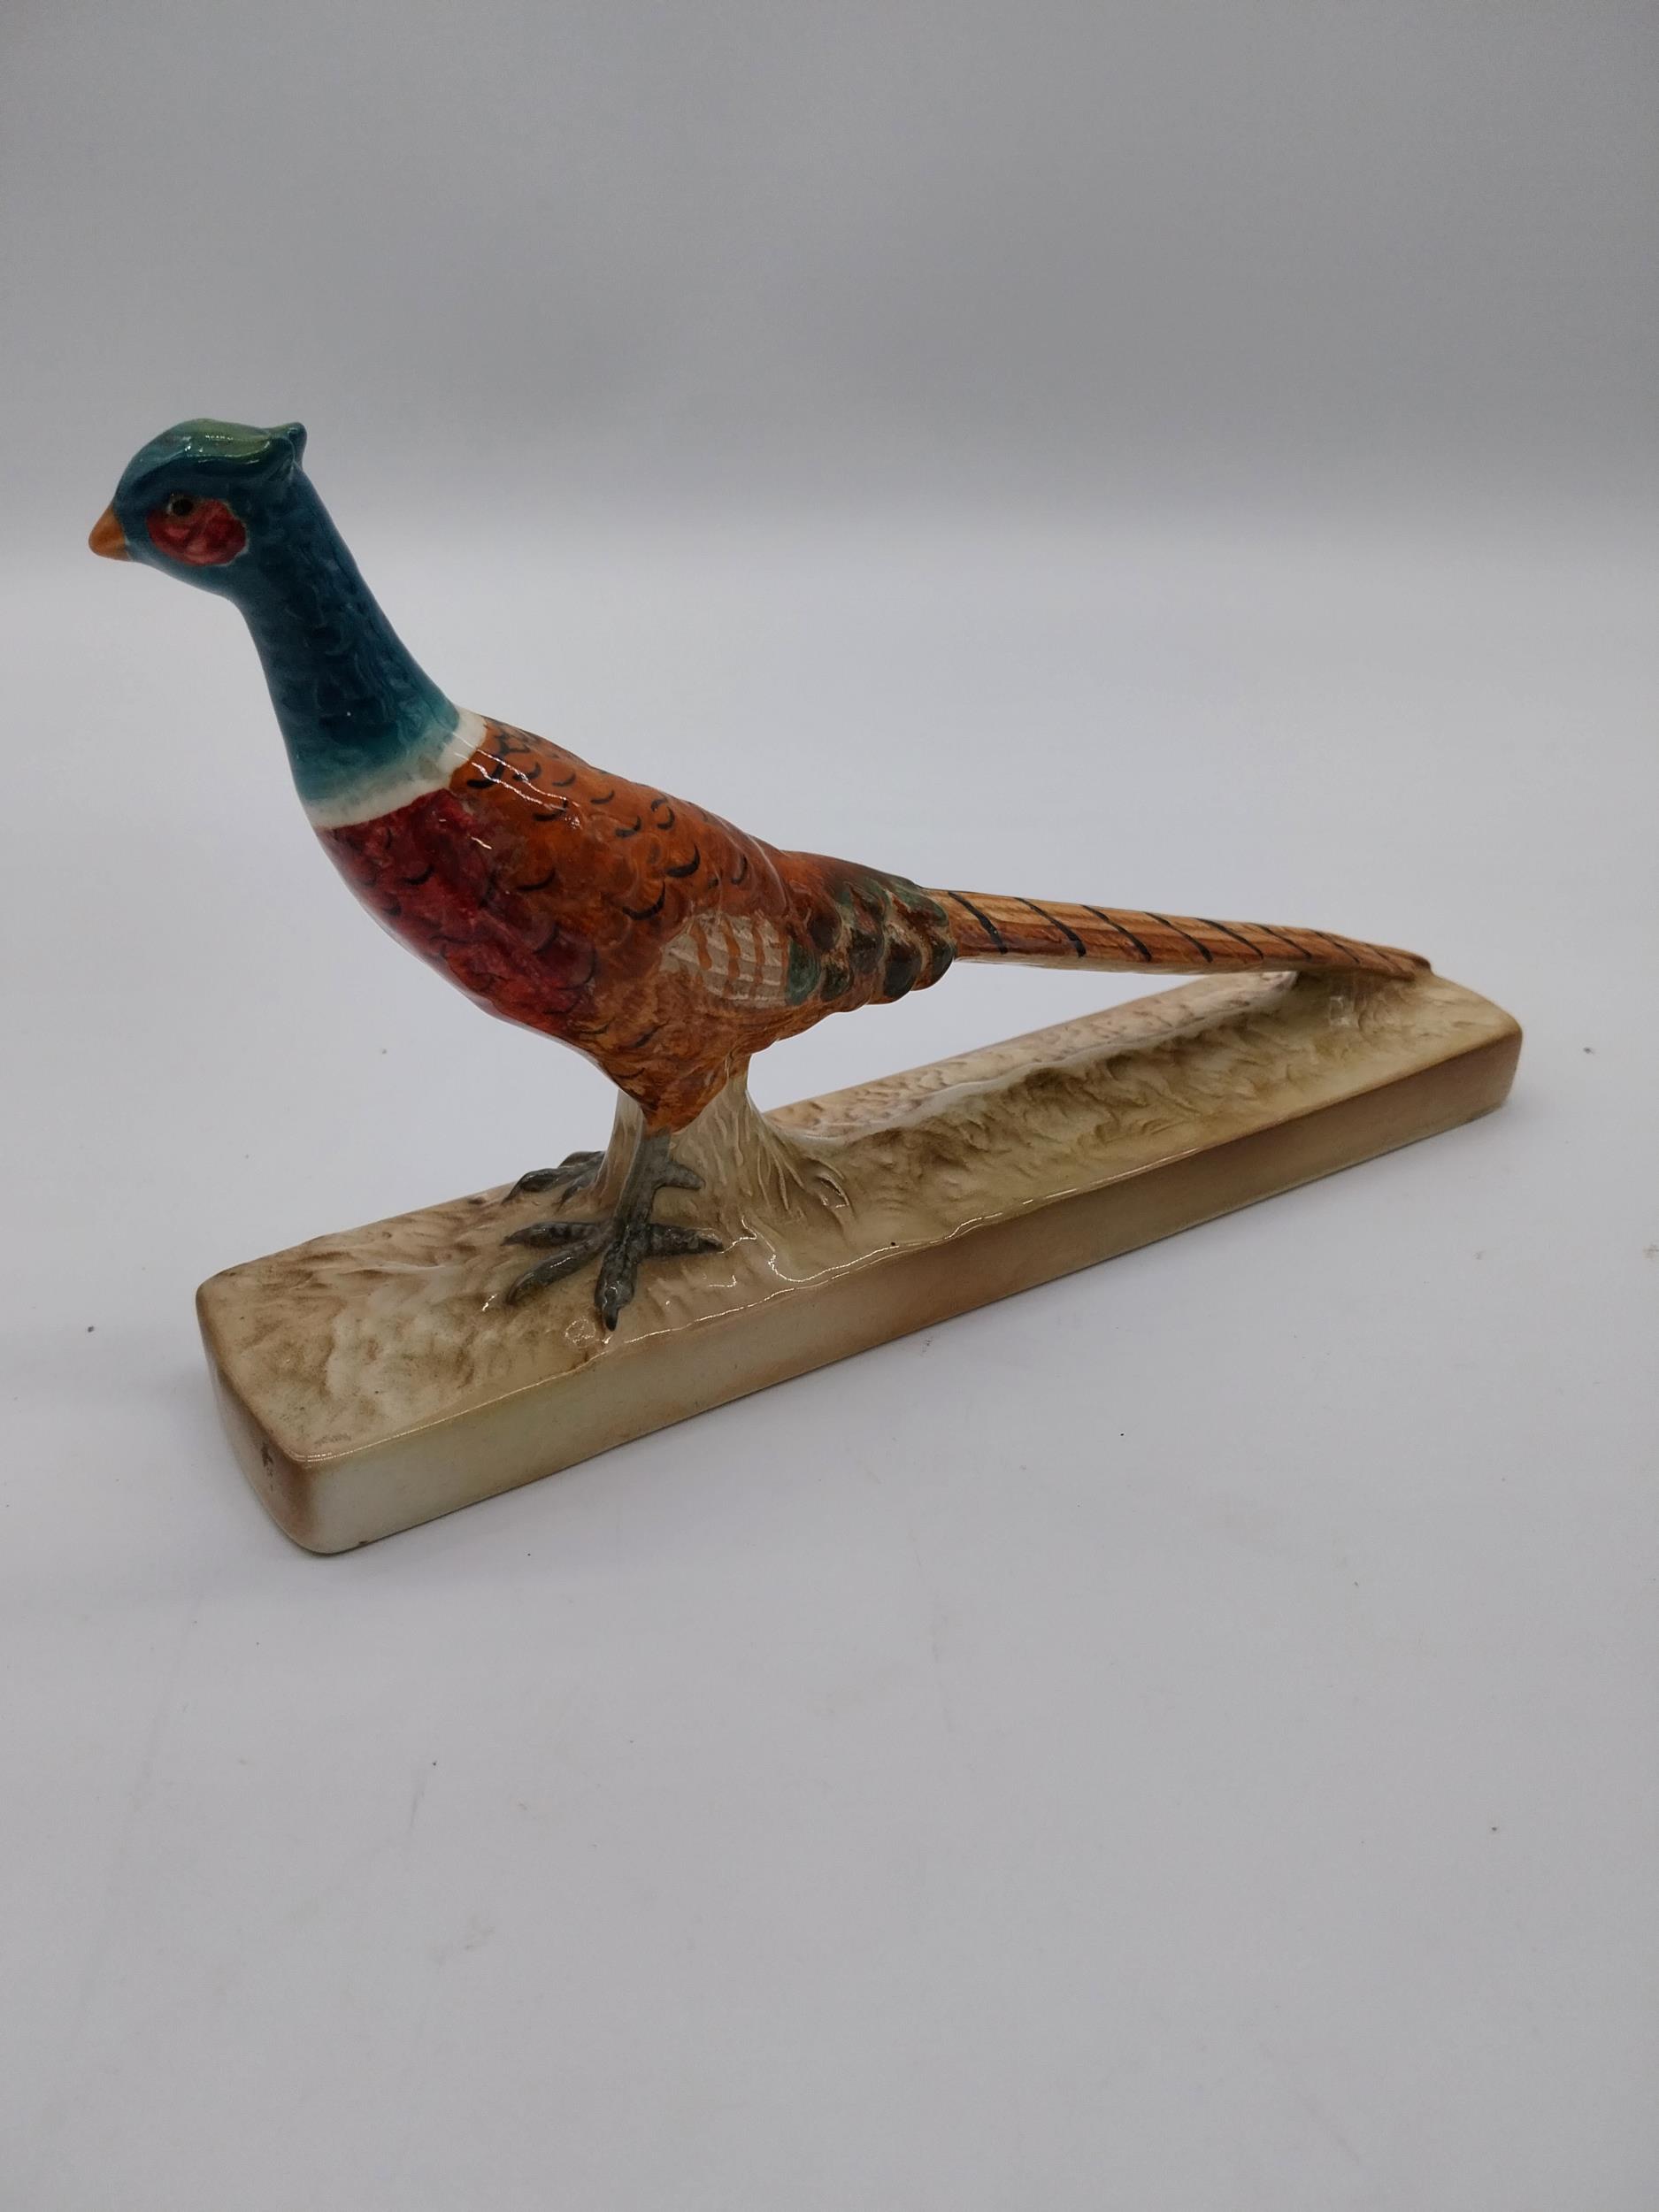 Beswick hand painted ceramic model of a Pheasant {14 cm H x 22 cm W}. - Image 2 of 2